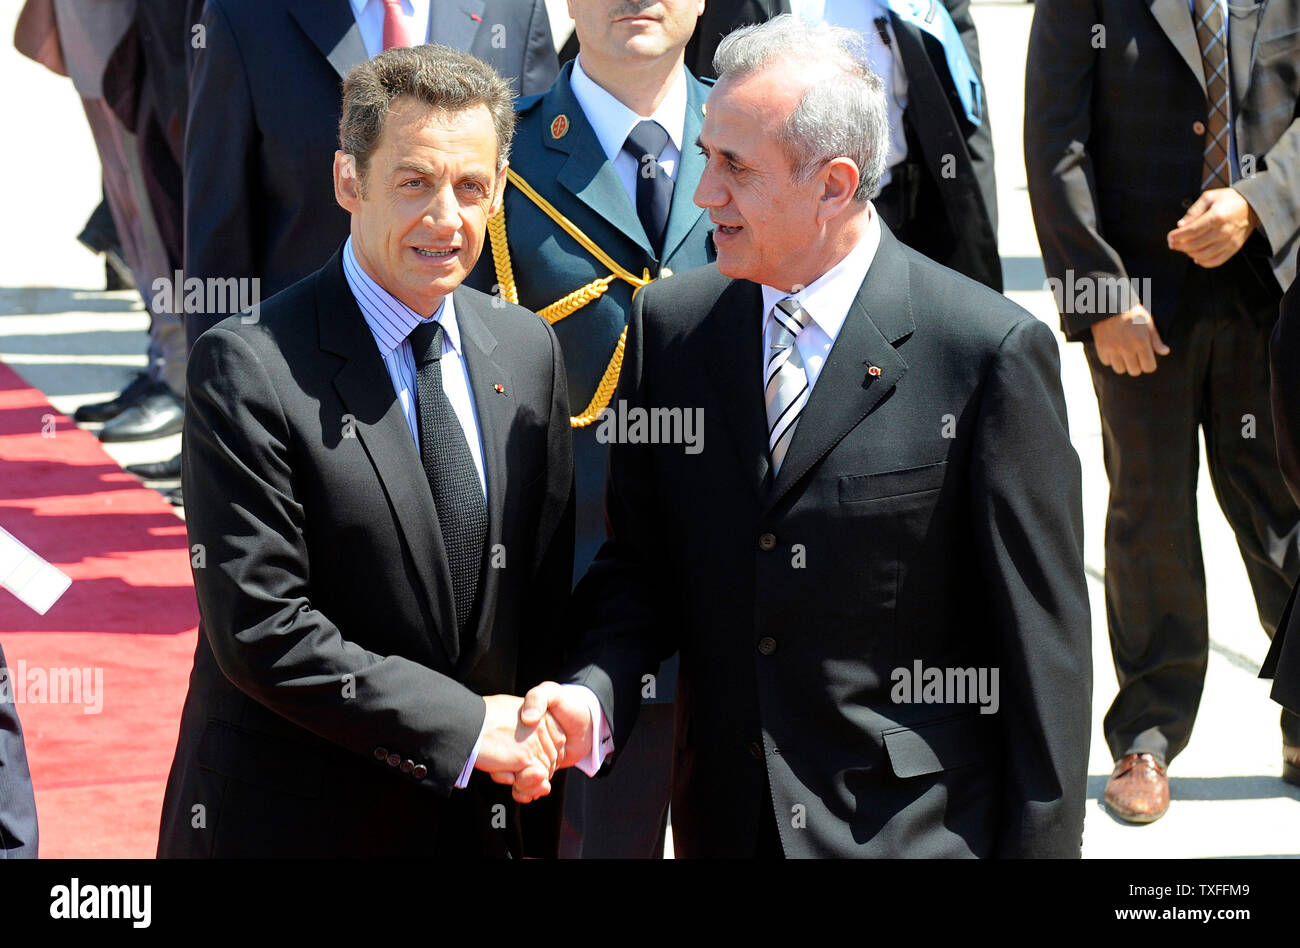 French President, Nicolas Sarkozy (L) is greeted by Lebanon’s recently elected president, Michel Suleiman at Beirut airport on June 7, 2008. Sarkozy is the first western head of state to meet Suleiman since the former army chief was elected president on May 25, following a Qatari-brokered deal to end the 18 month political stand off between the Lebanese government and the Hezbollah backed opposition. (UPI Photo) Stock Photo